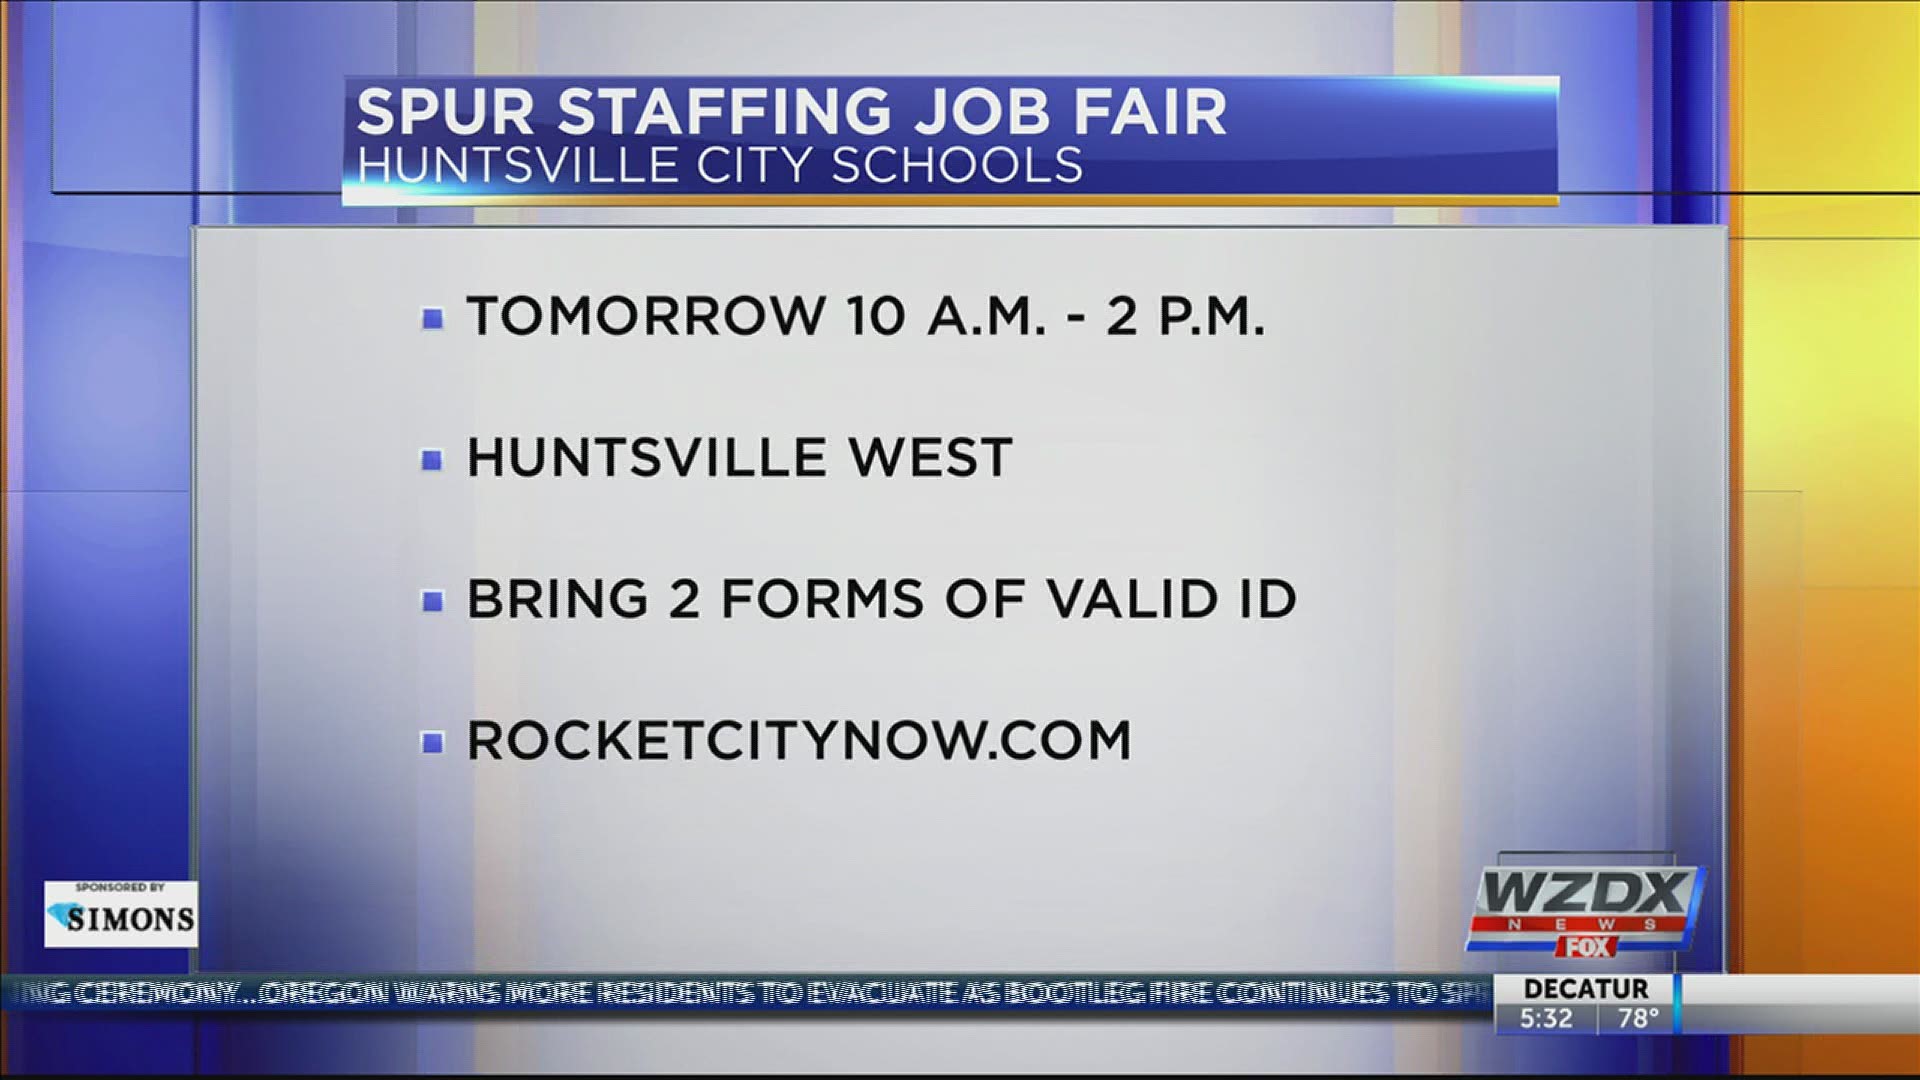 Huntsville City Schools is partnering with Spur Staffing to host a job fair for the district.